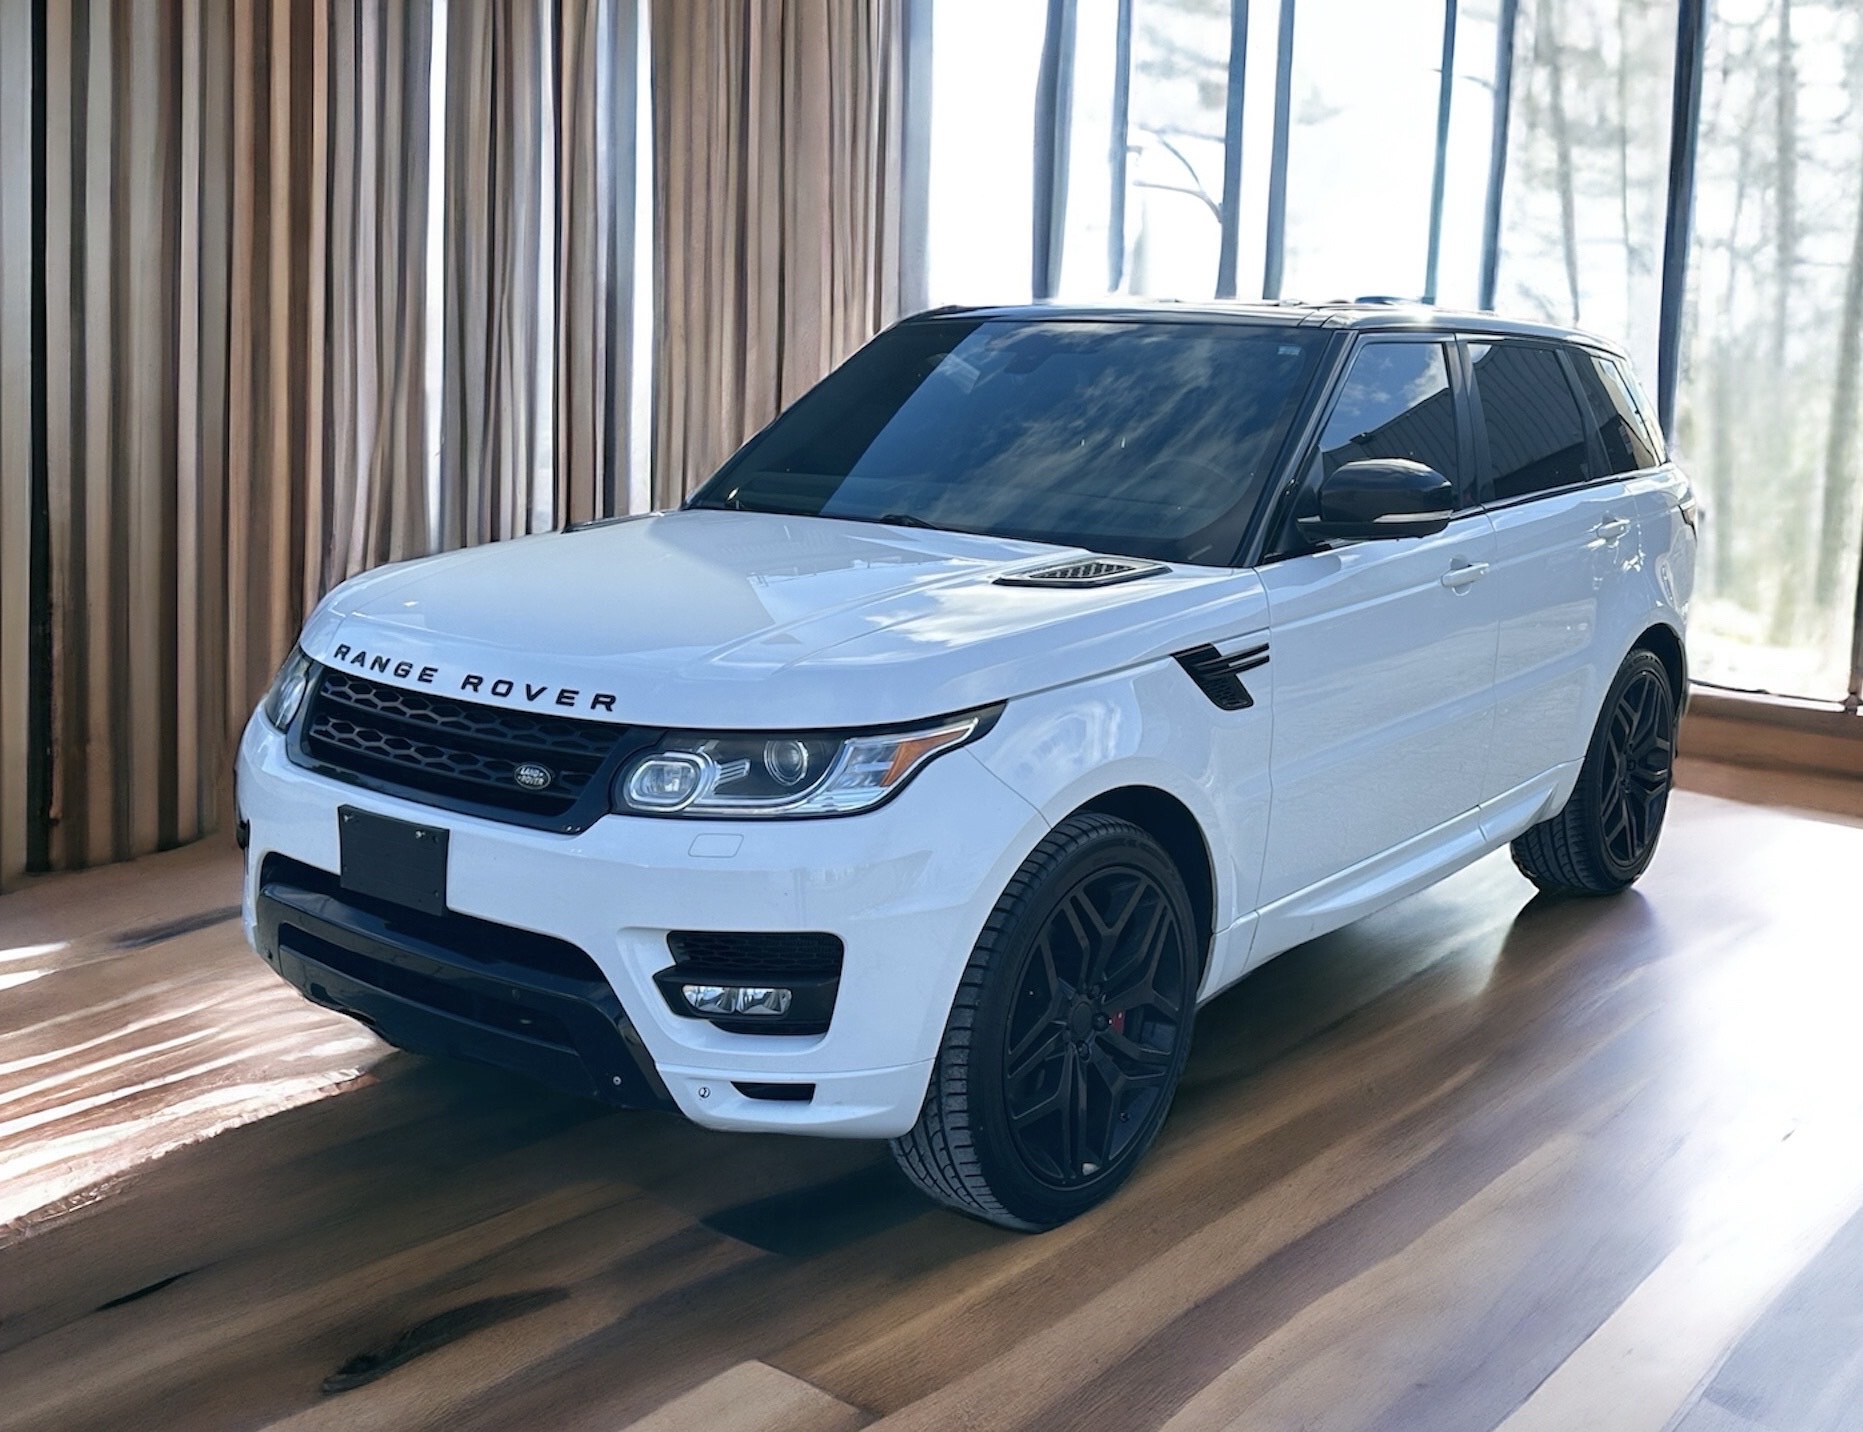 2015 Land Rover Range Rover Sport 4WD V8 SC Autobiography Dynamic ~ TOP OF THE LINE!